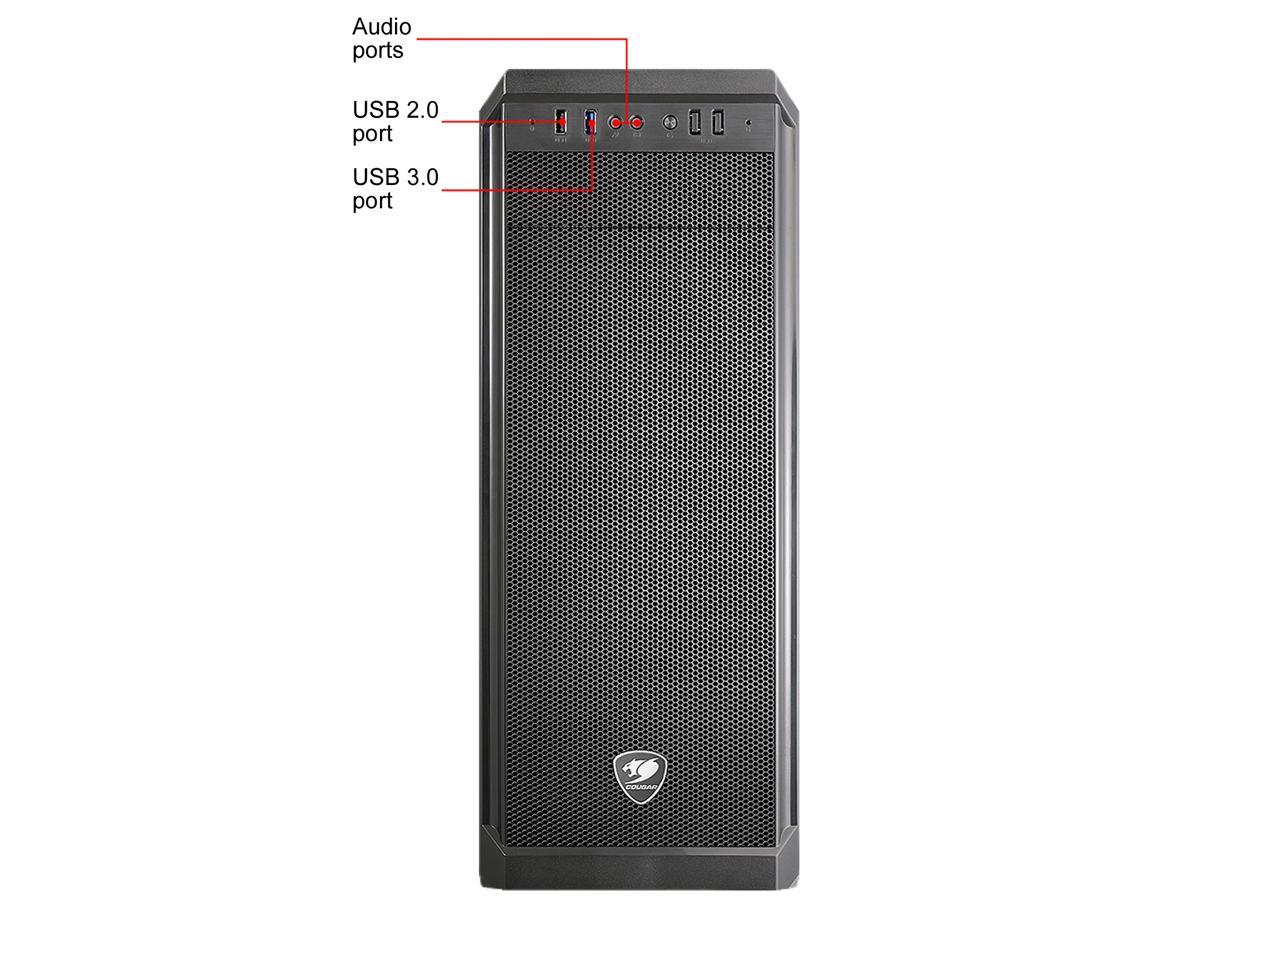 Cougar MX330-X Mid Tower Case with USB 3.0